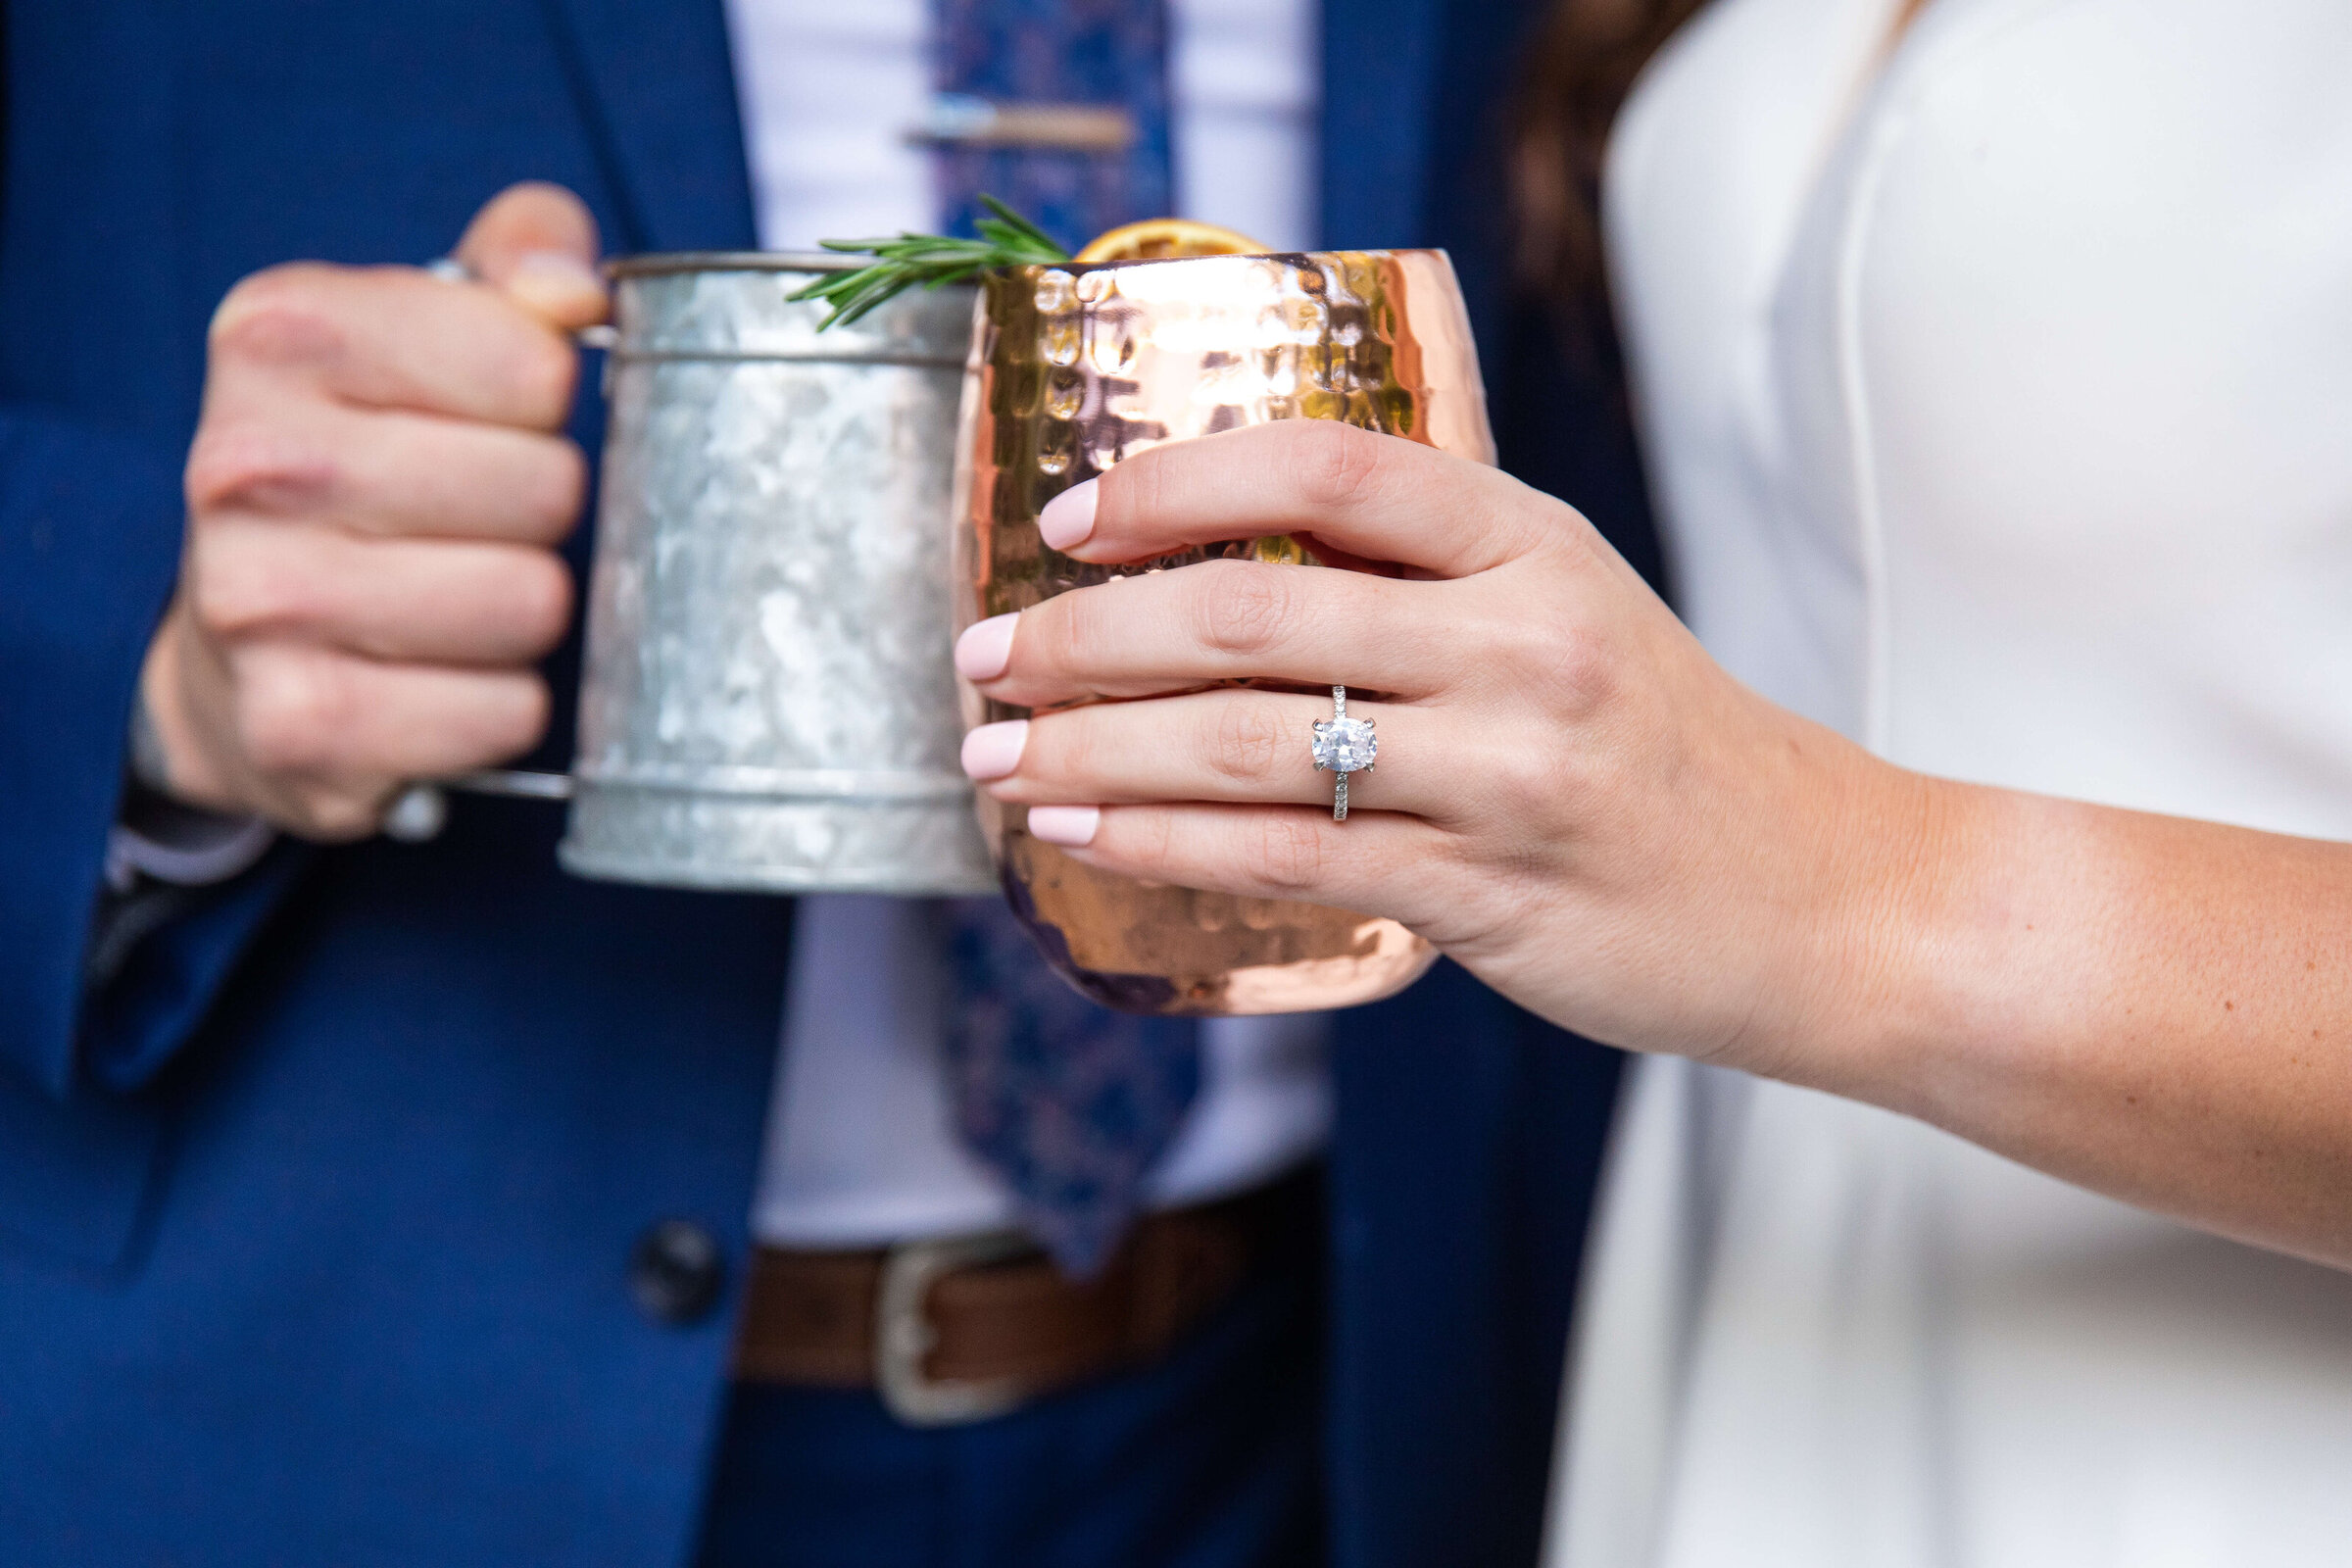 A bride and groom holding moscow mule mugs and the photo is up close of their hands showing the bride's ring.